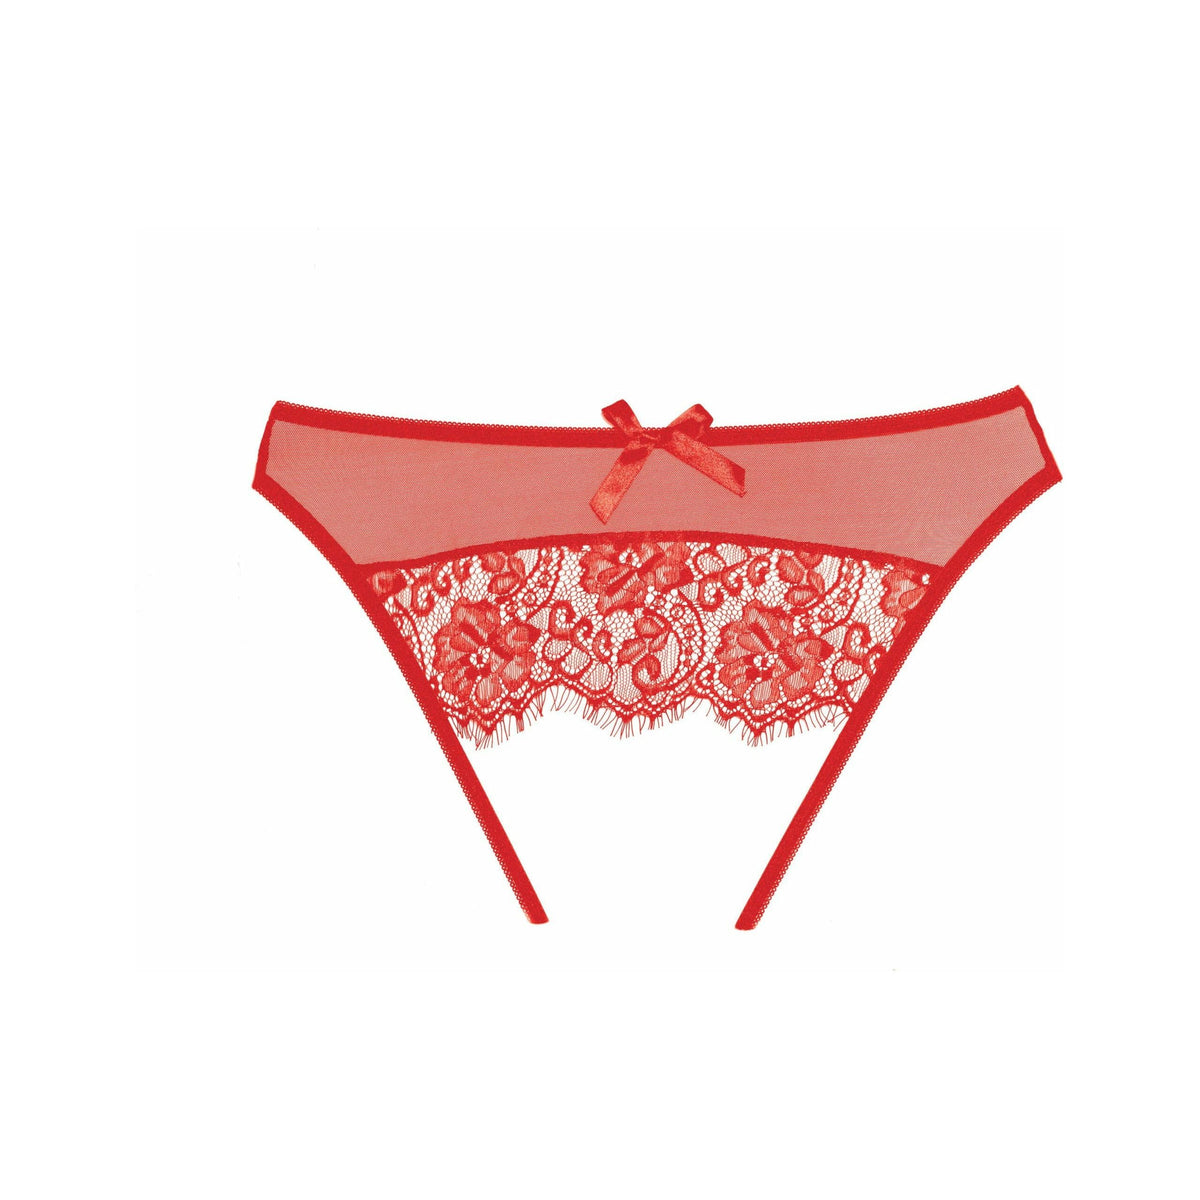 Allure Adore - Expose Red Panty - O/S